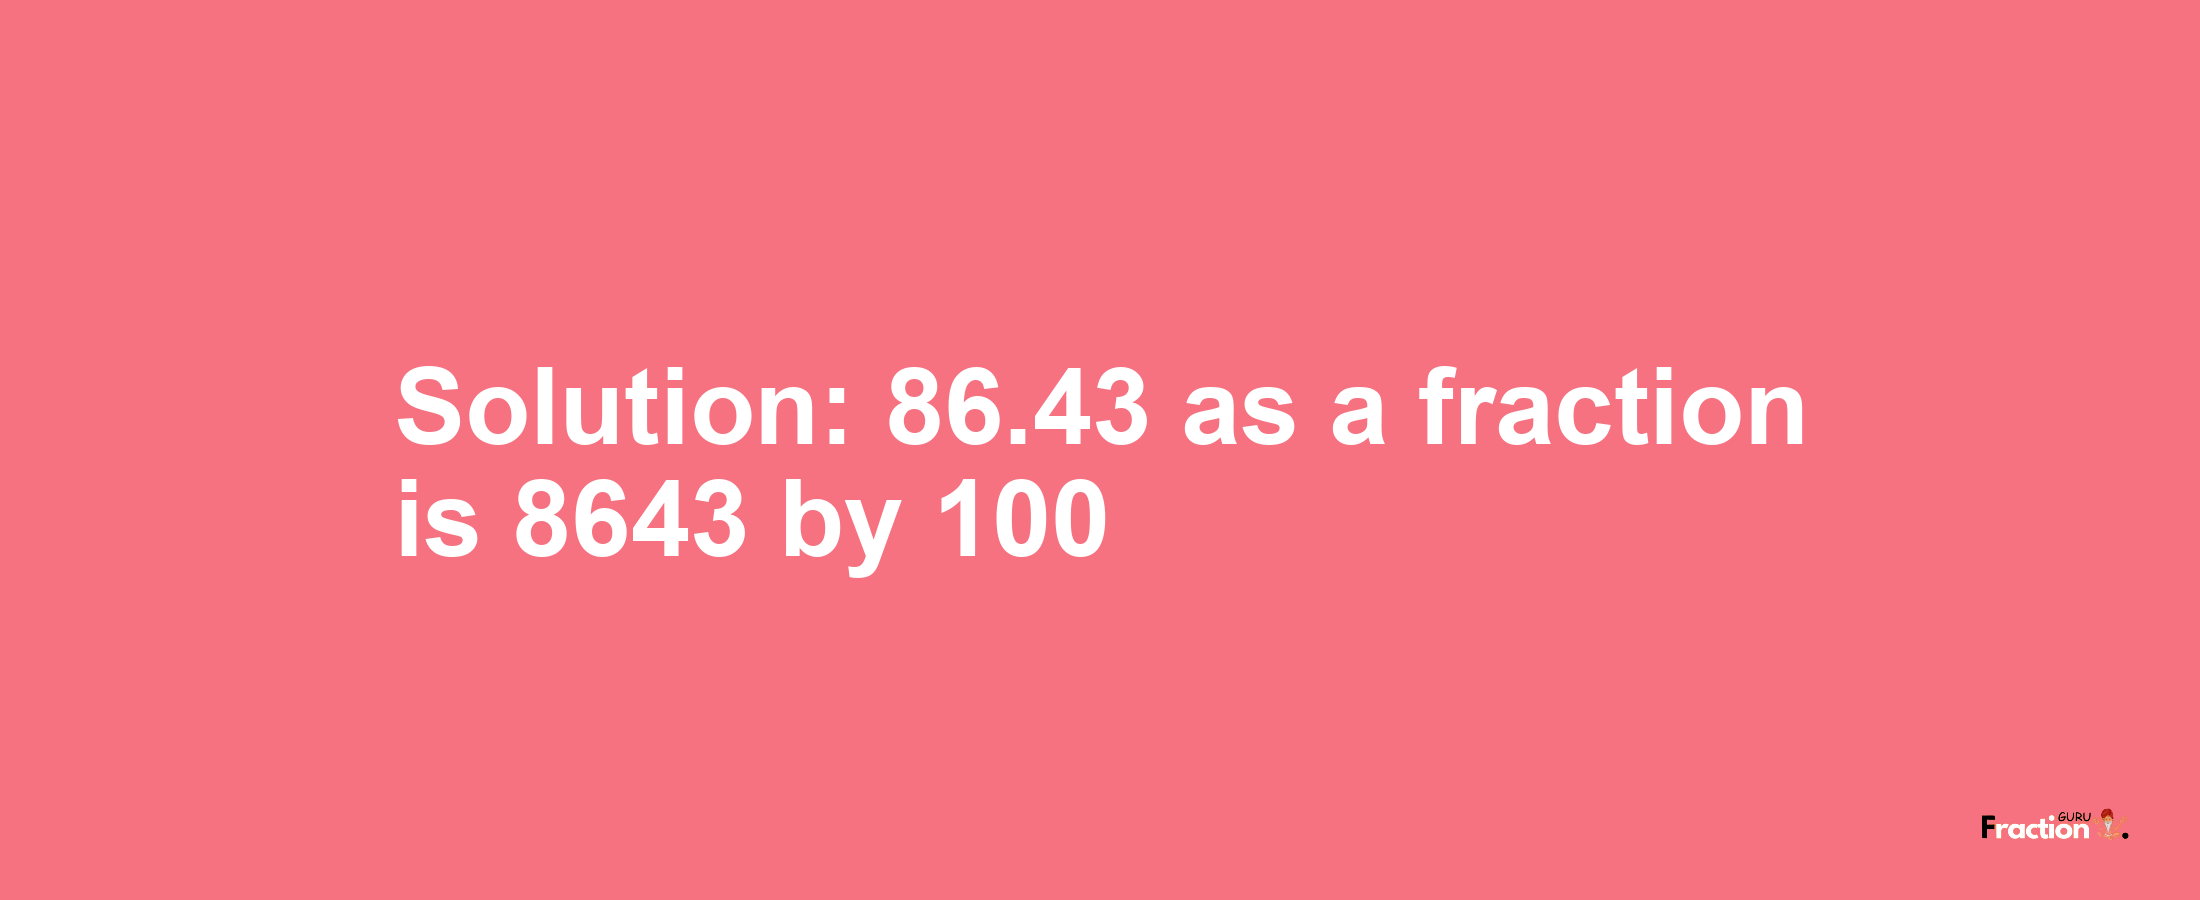 Solution:86.43 as a fraction is 8643/100